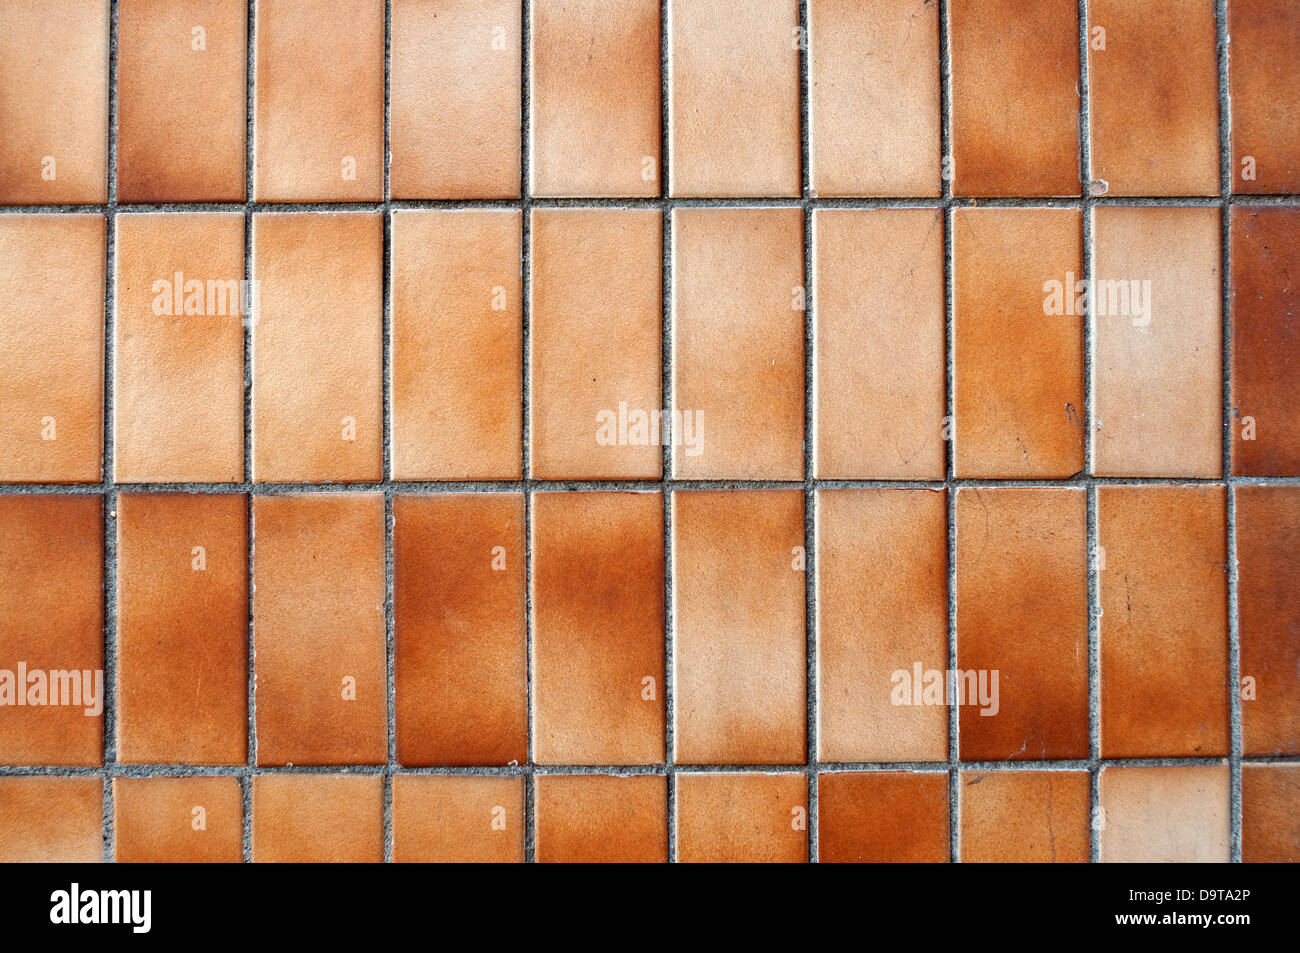 texture of a brown ceramic tiled wall Stock Photo